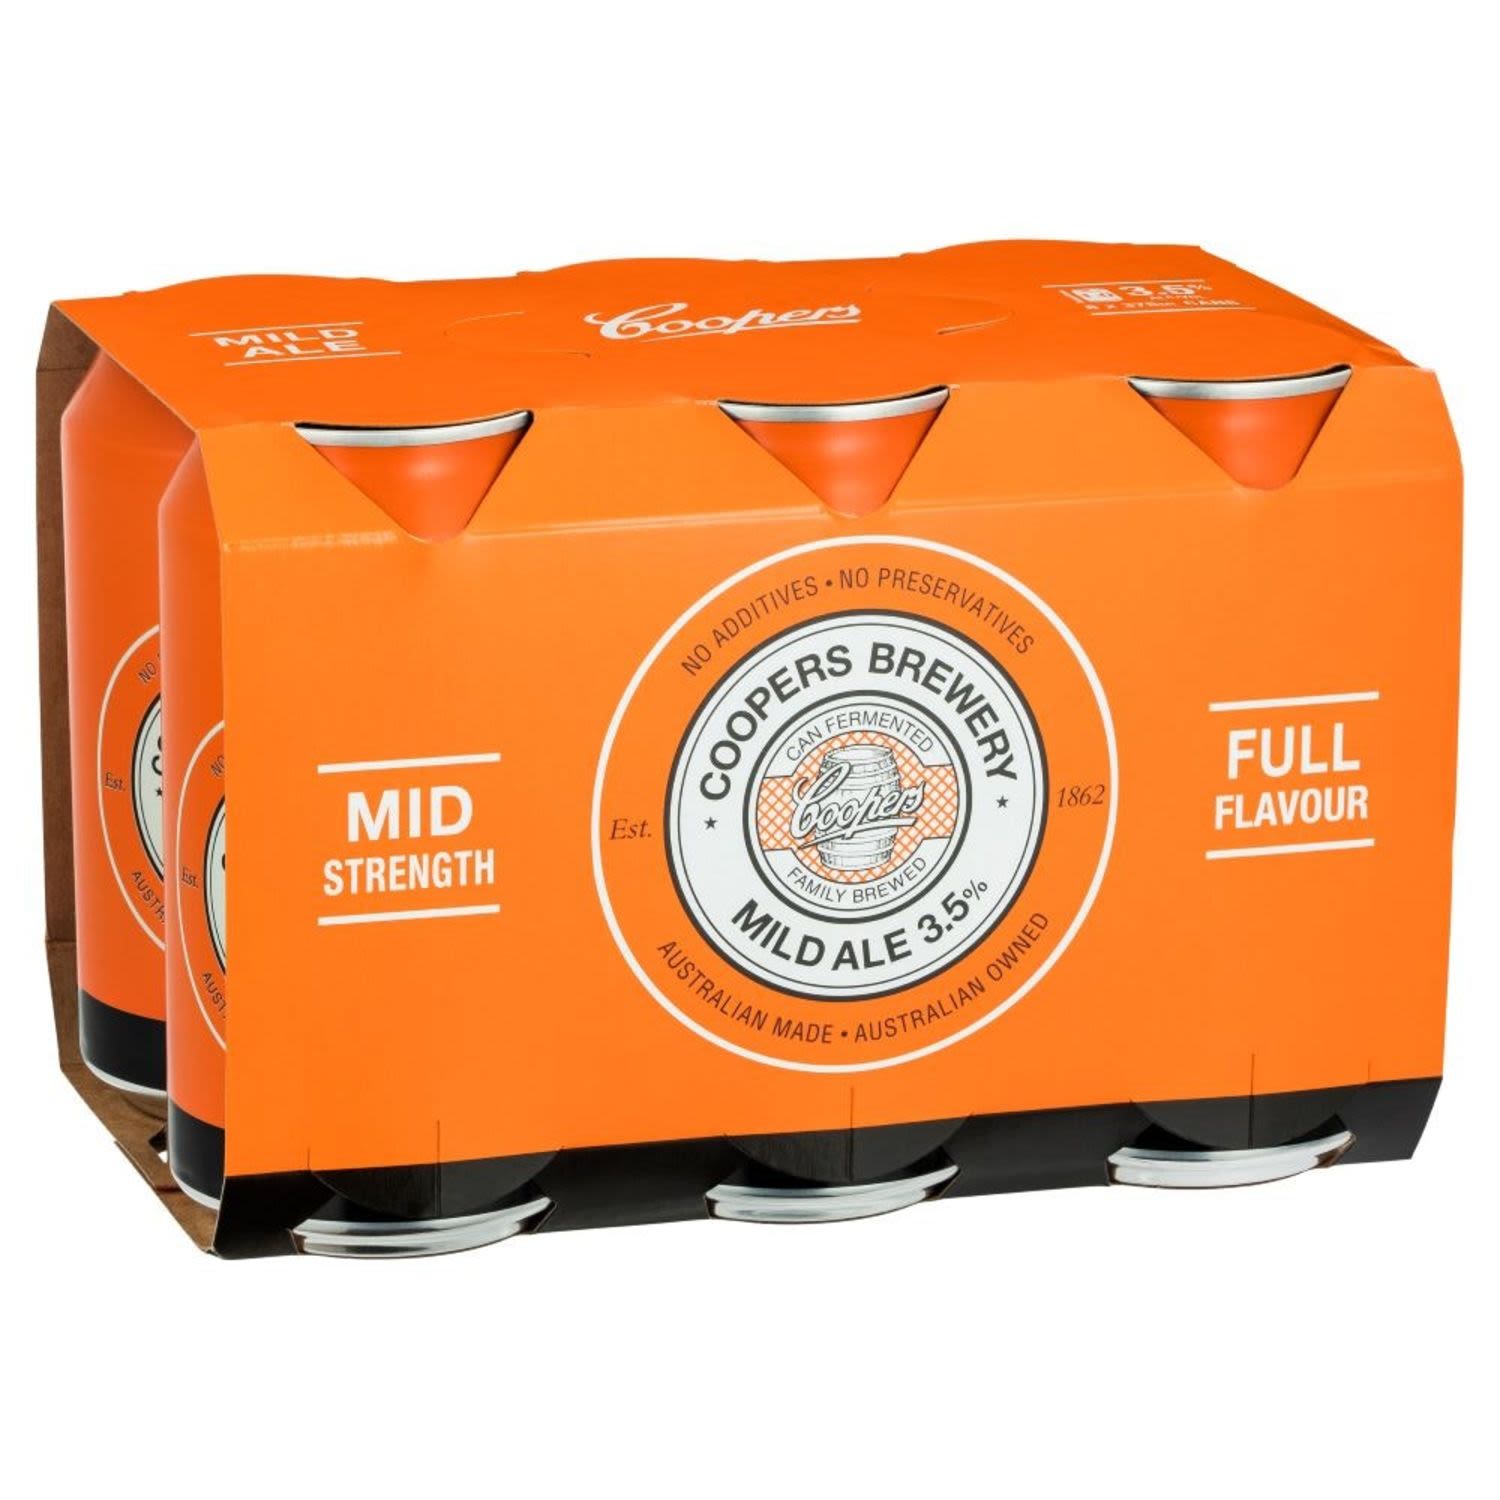 Coopers Brewery Mild Ale 3.5% 375ml